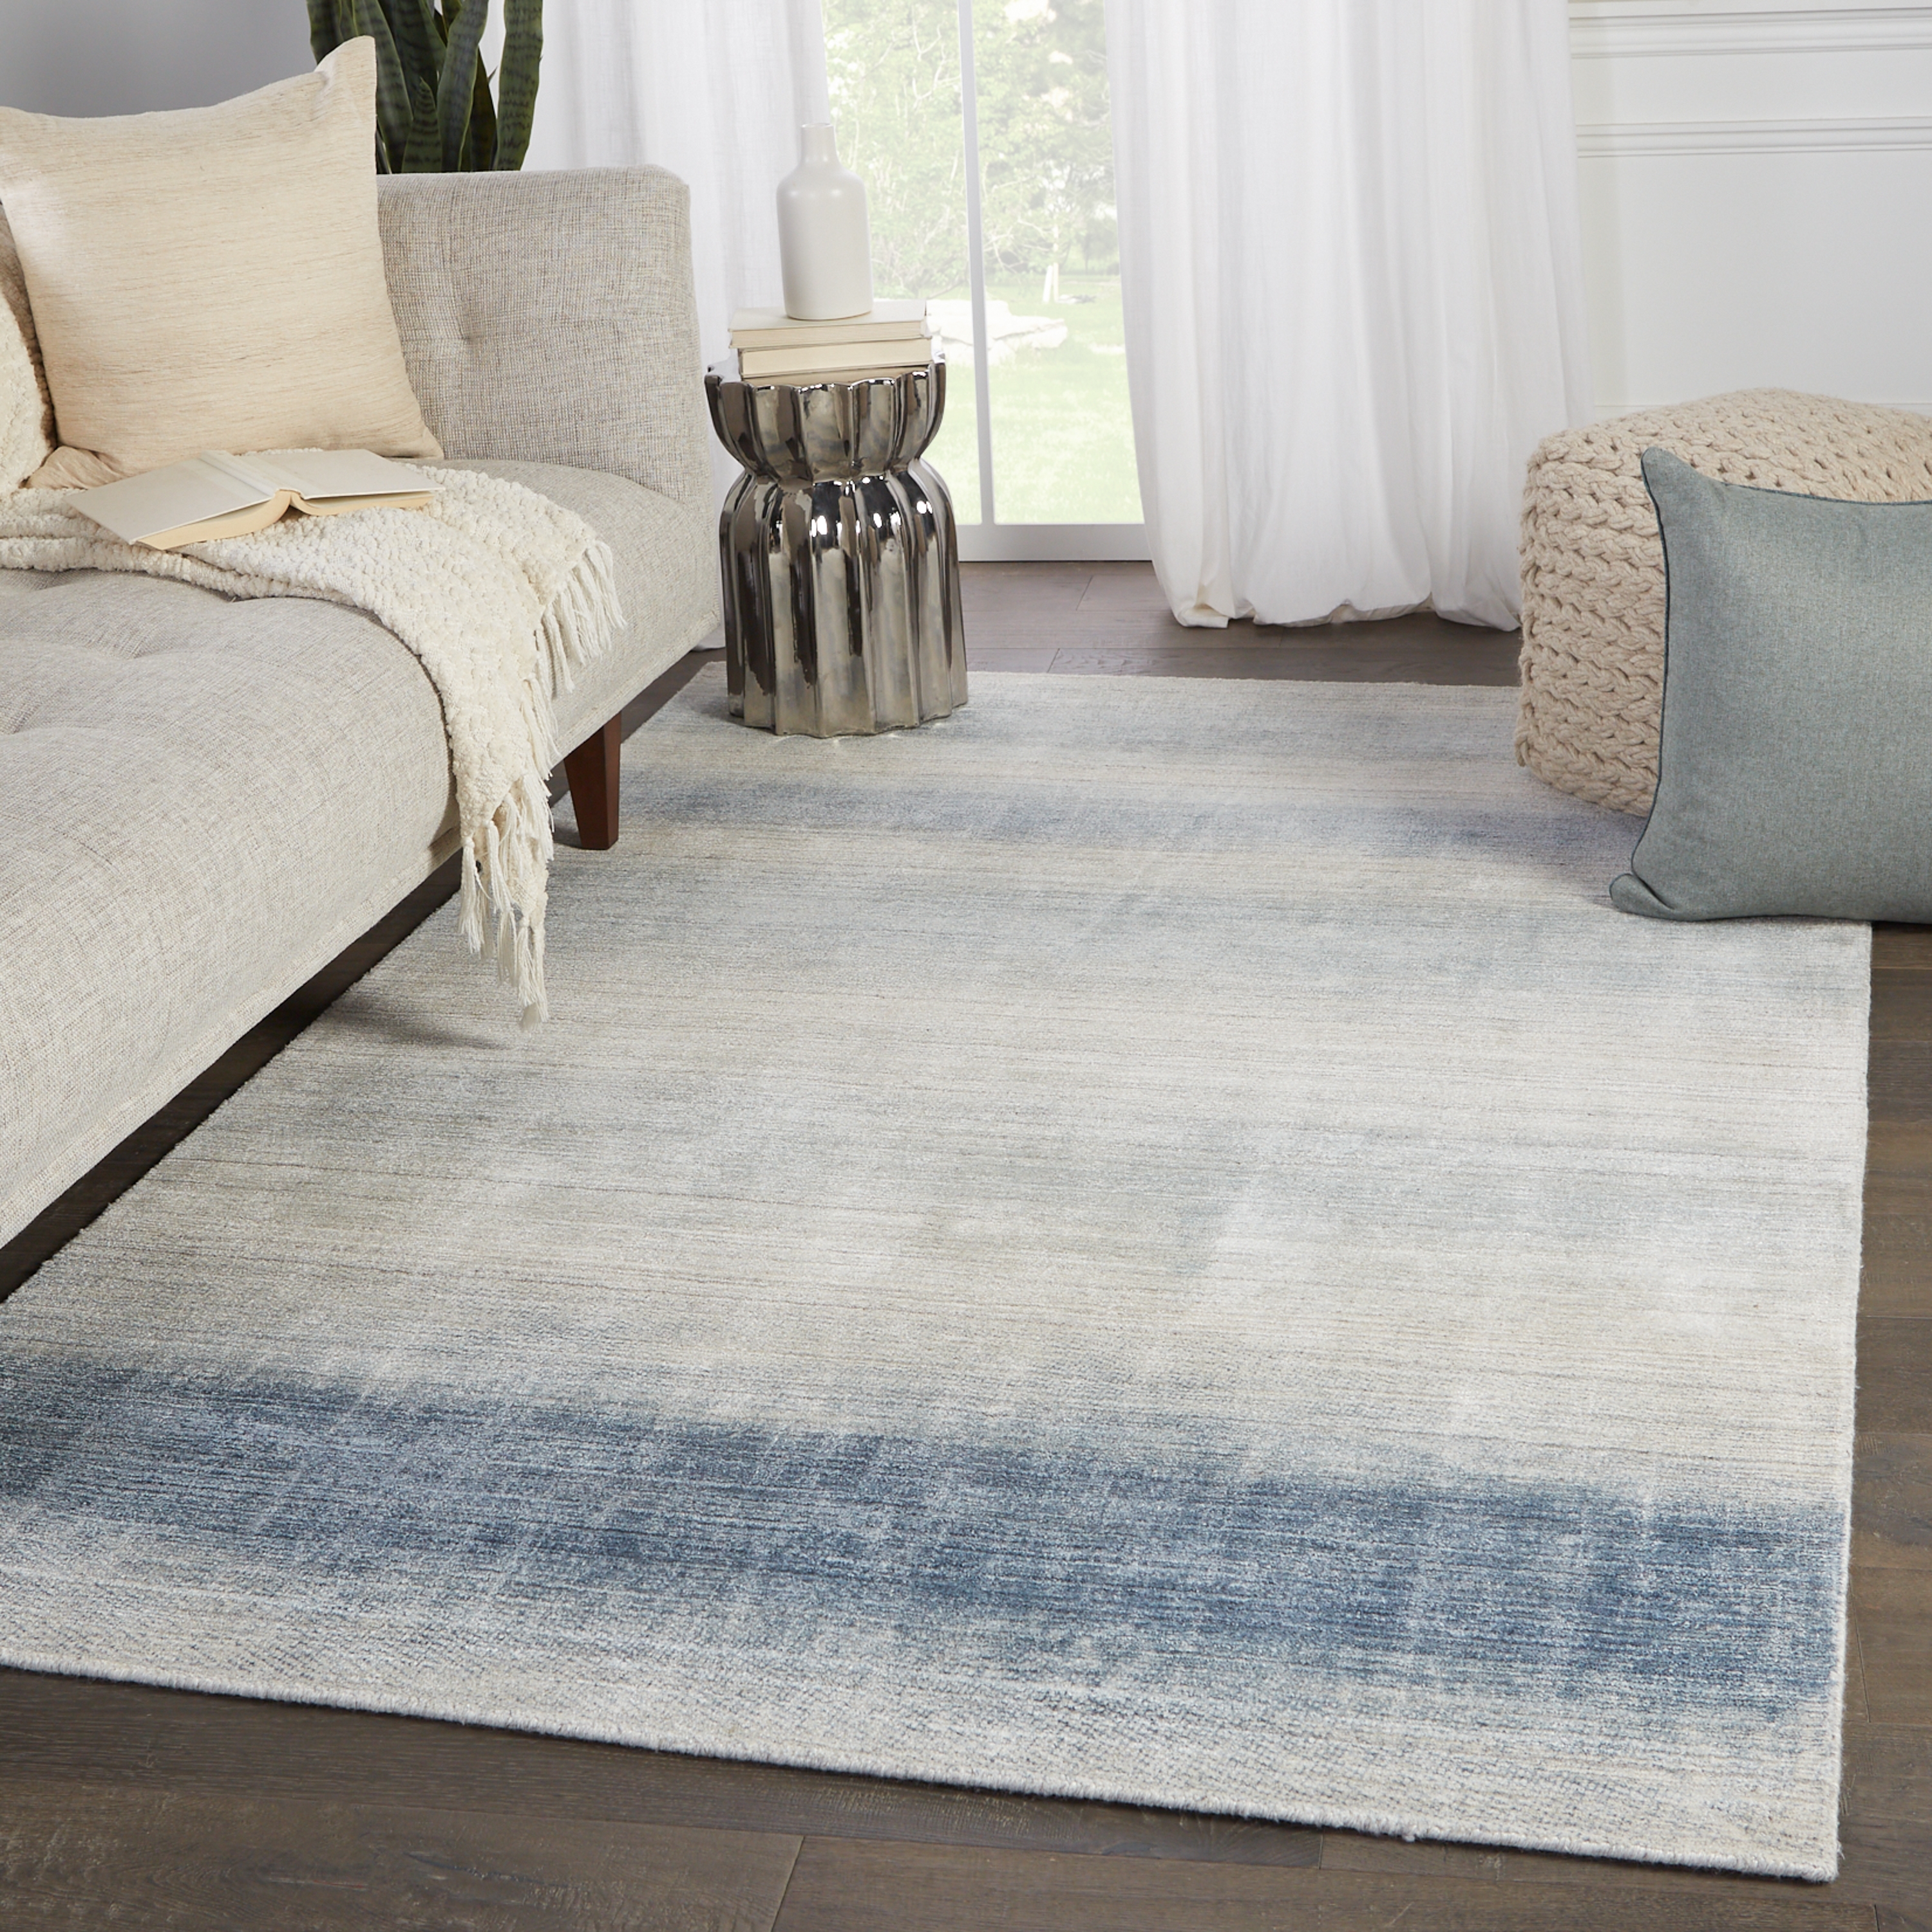 Barclay Butera by Bayshores Handmade Ombre Blue/ Beige Area Rug (8'X10') - Image 4